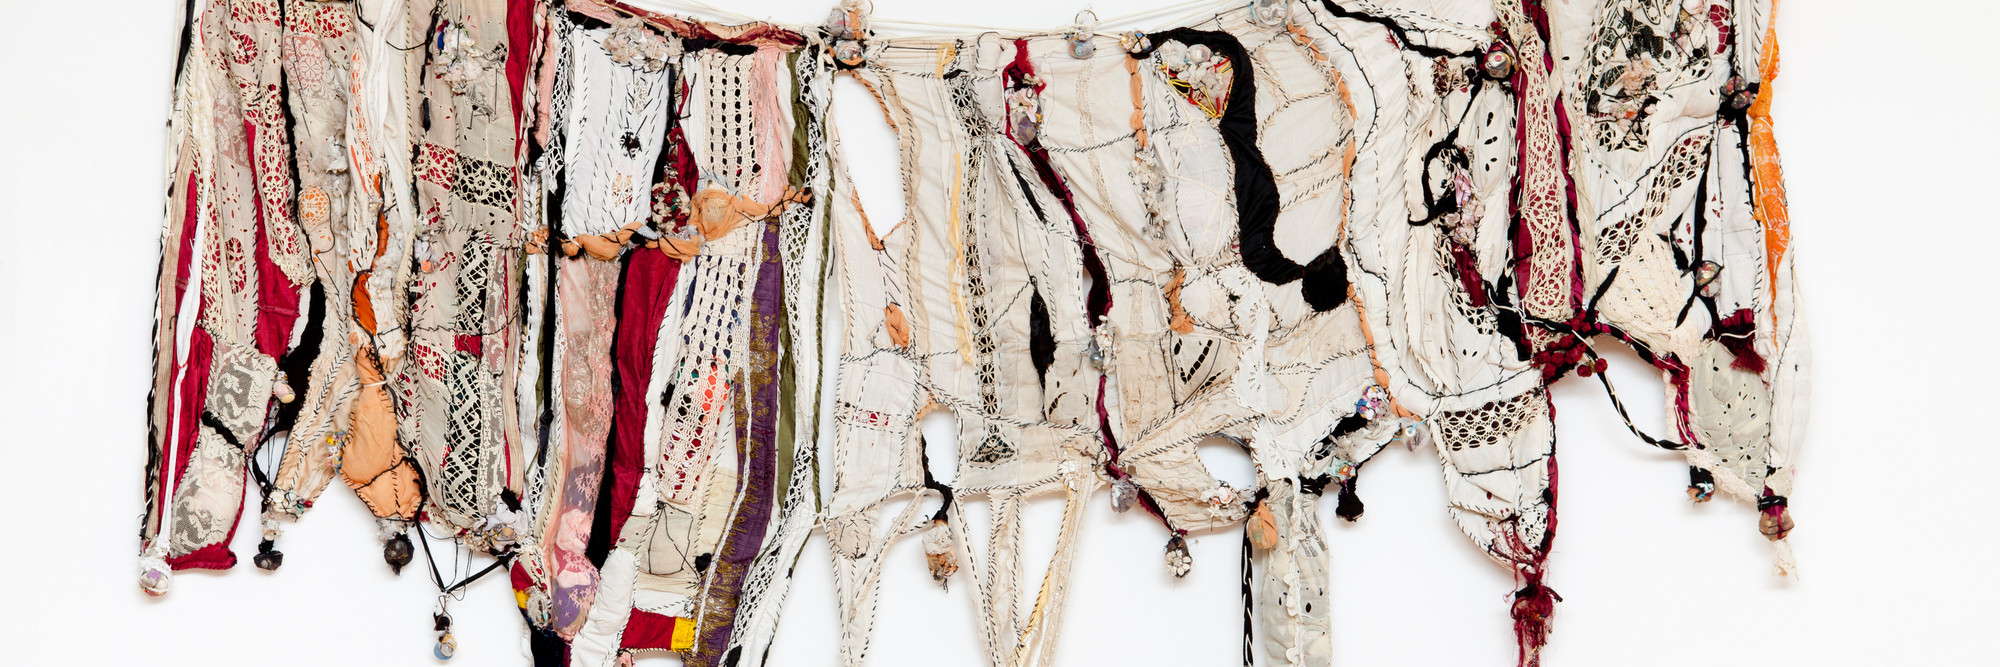 Sonia Gomes. Memory. 2004. Textile, plastic, glass, ceramic, and metal, 58 1/8&#34; × 8&#39; 10 1/4&#34; (147.6 × 270 cm). The Museum of Modern Art, New York. Gift of Christie Zhou and purchase. ©️ 2023 Sonia Gomes. Courtesy of the artist